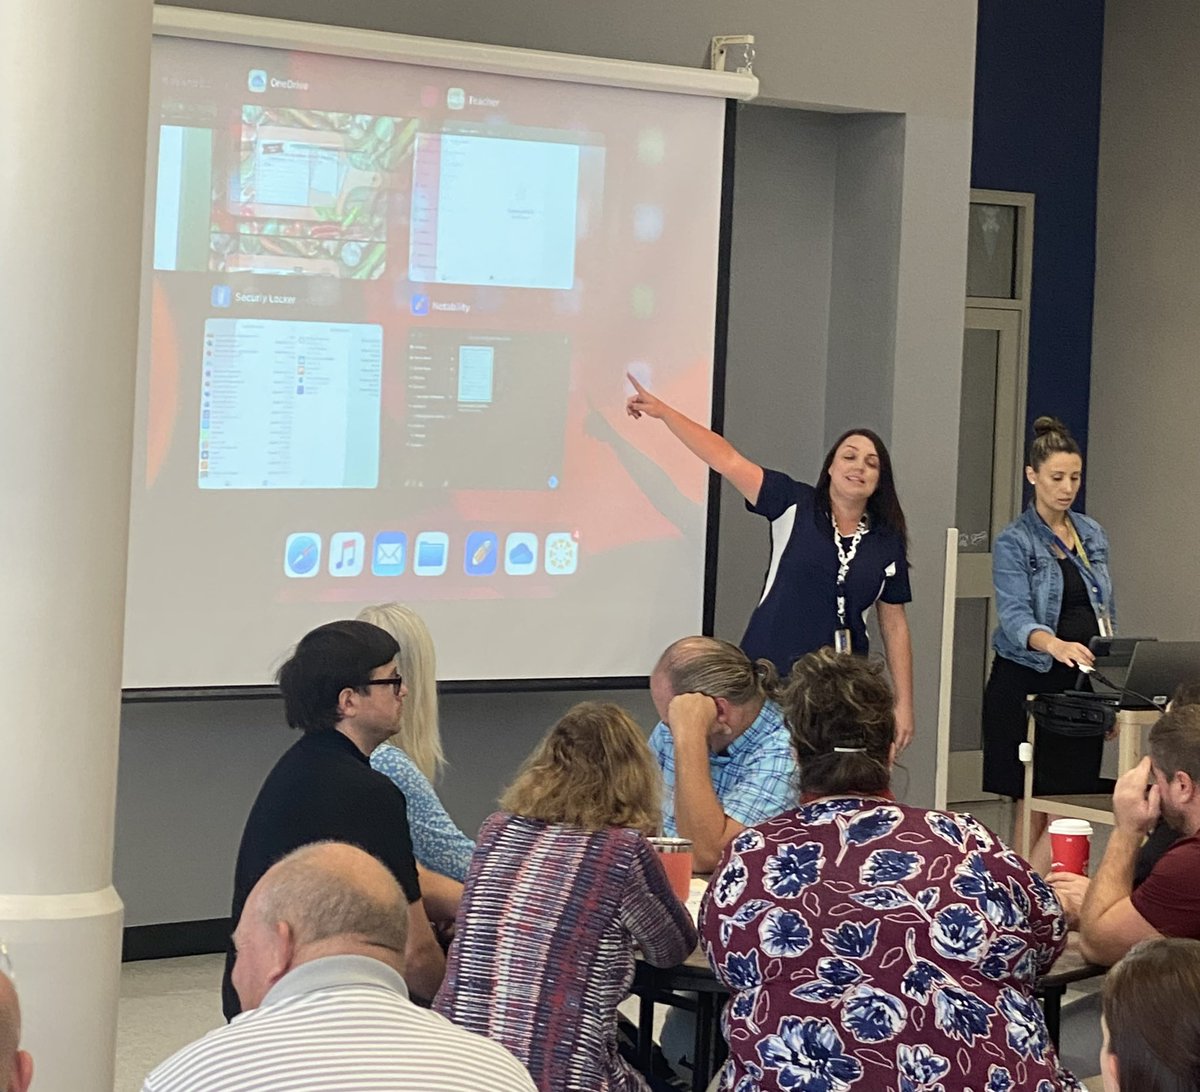 Crystal River High School believes in making connections with students. Teachers discuss integrating technology as a tool rather than using it as a teacher. #teachlikeapirate